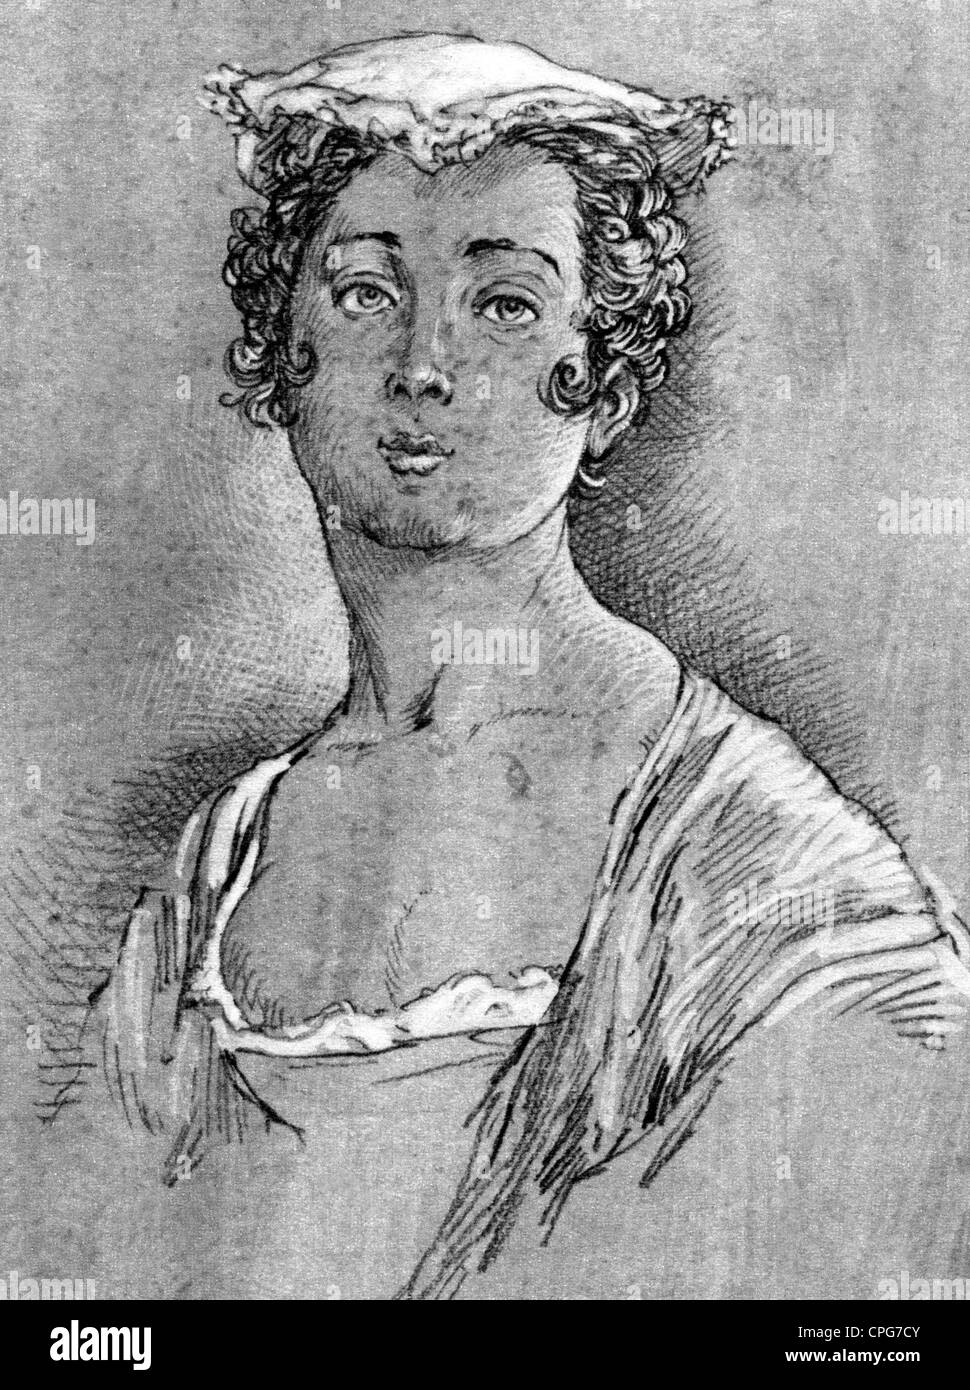 Cramer, Anna, 17th century, lady-in-waiting, accomplice of the czar Peter the Great, portrait, lithograph based on drawing, Stock Photo